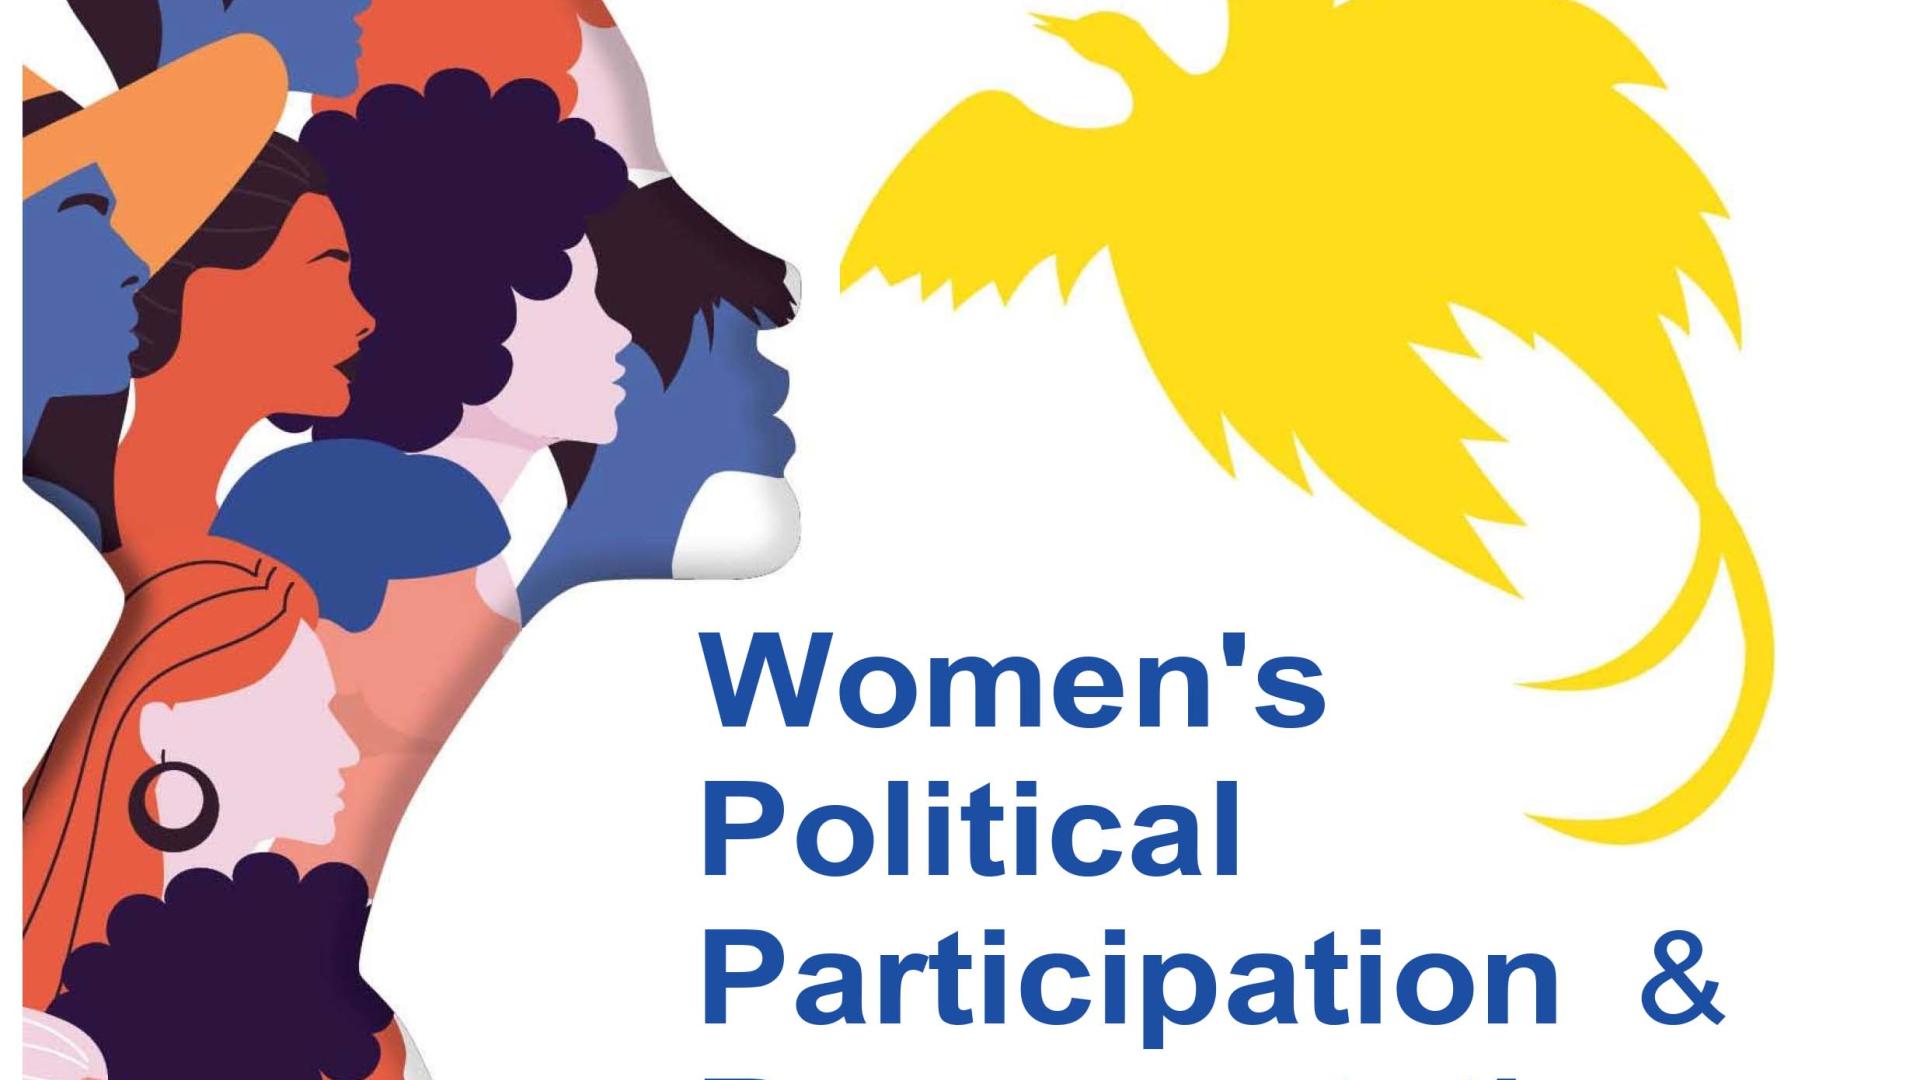 Women S Political Participation And Representation Training Manual 2021 United Nations